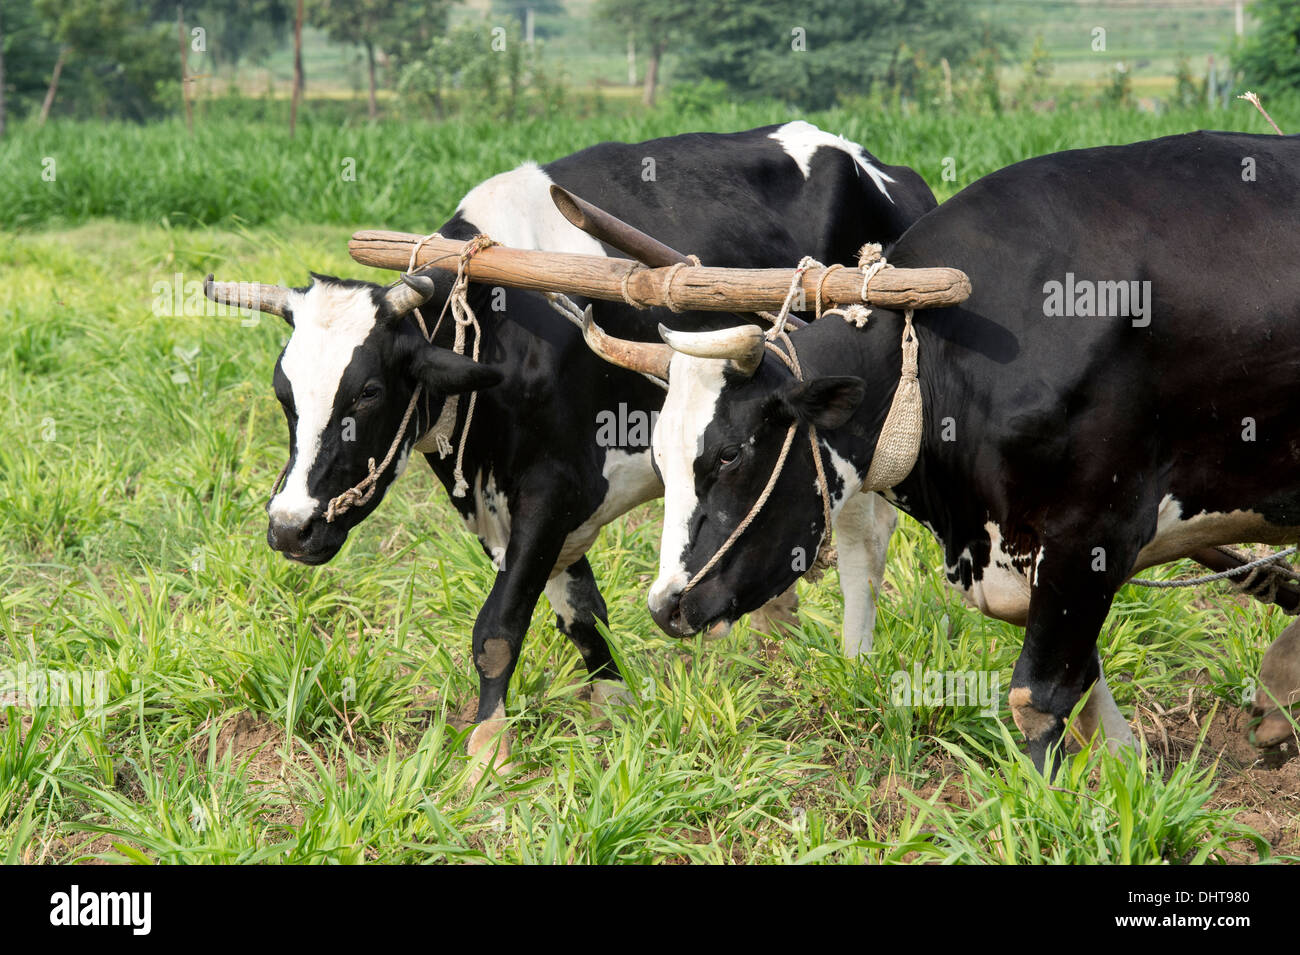 Indian farmer ploughing with bulls using a wooden yoke in the rural indian countryside. Andhra Pradesh, India Stock Photo